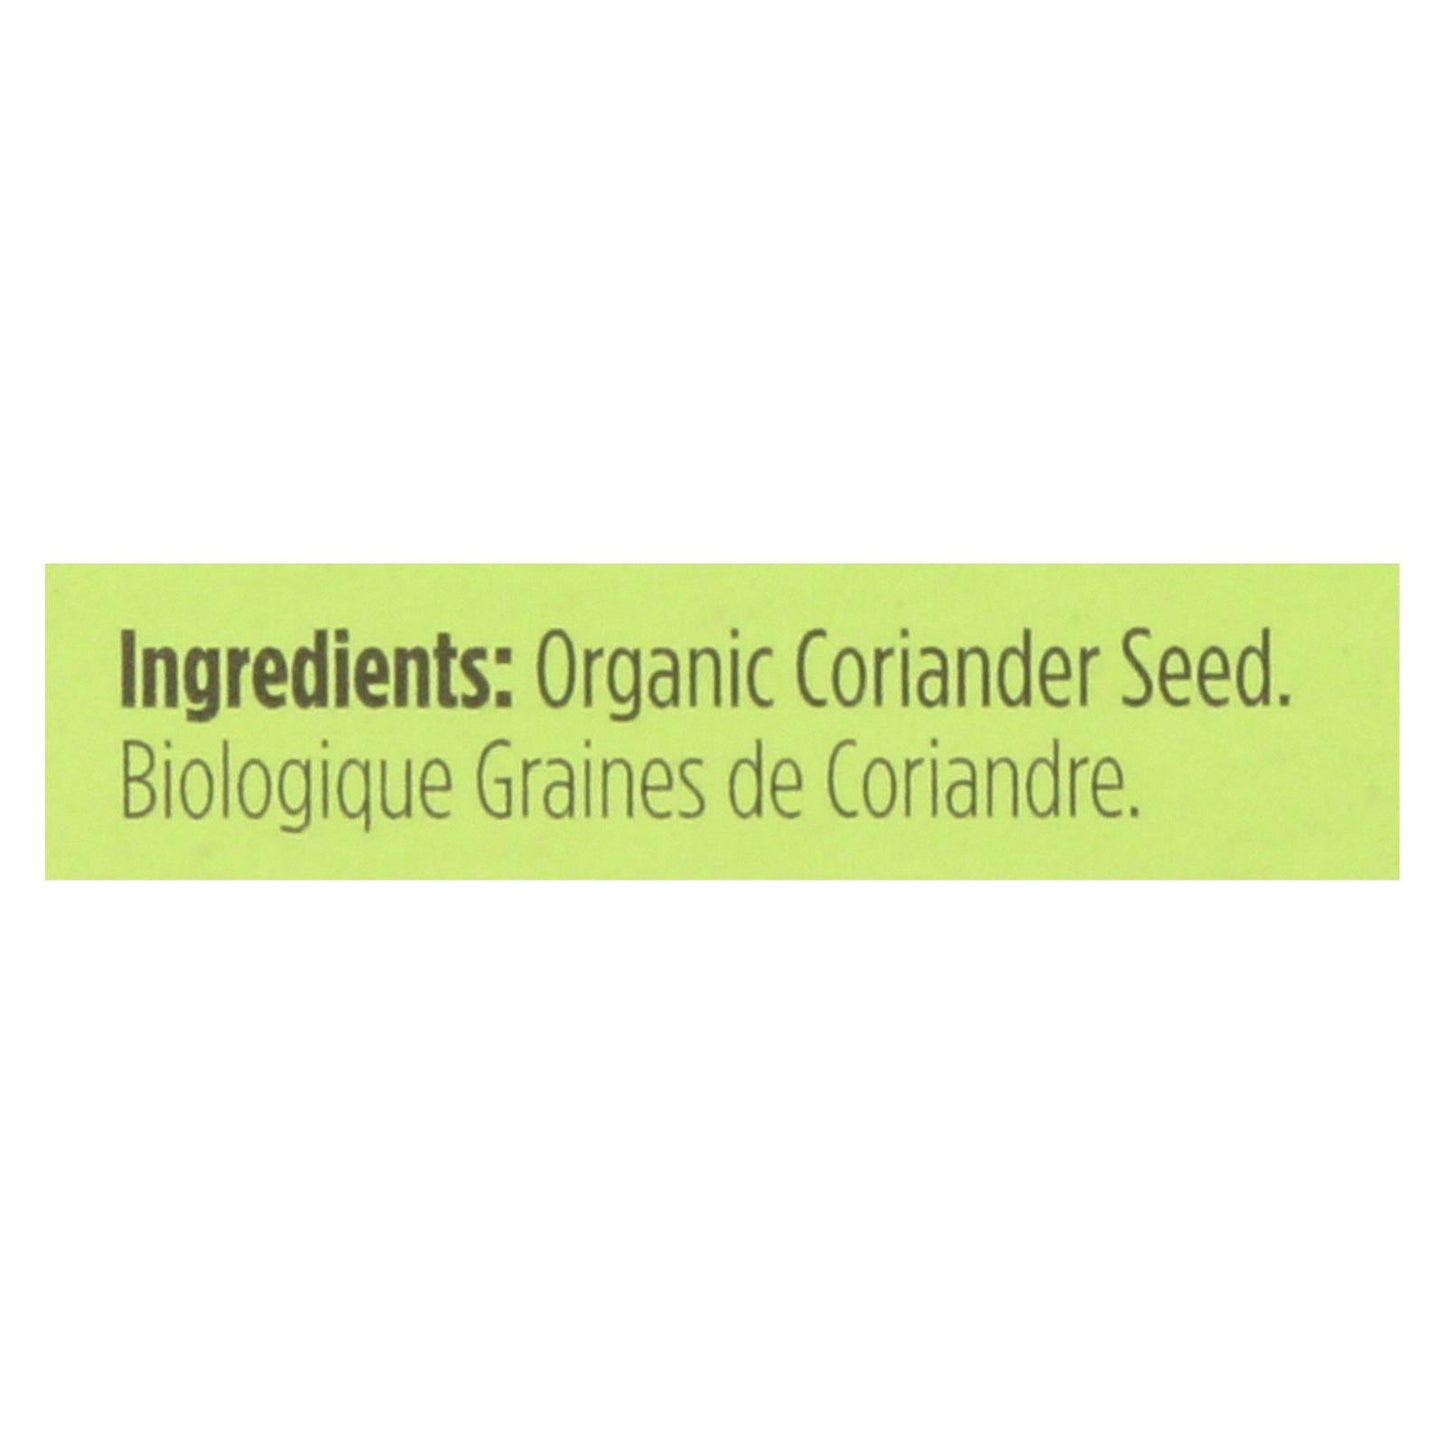 Buy Spicely Organics - Organic Coriander Seed - Case Of 6 - 0.3 Oz.  at OnlyNaturals.us